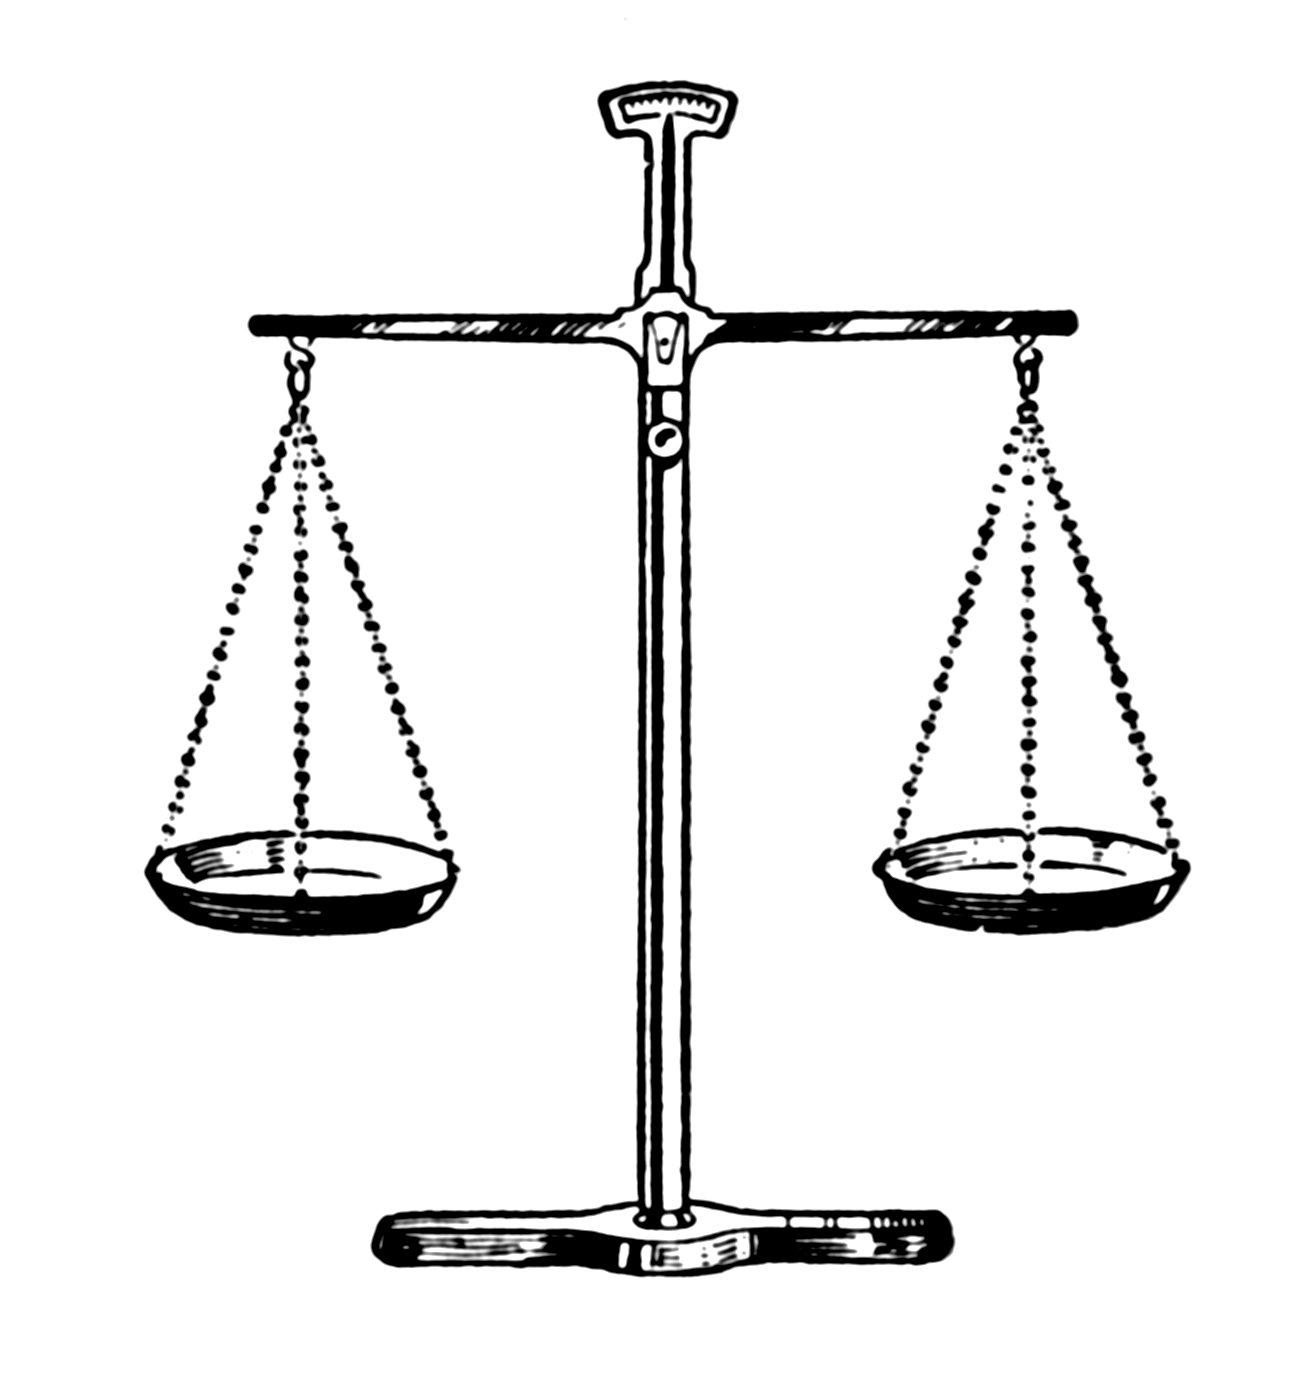 File:Scales of Justice (PSF) - Wikimedia Commons